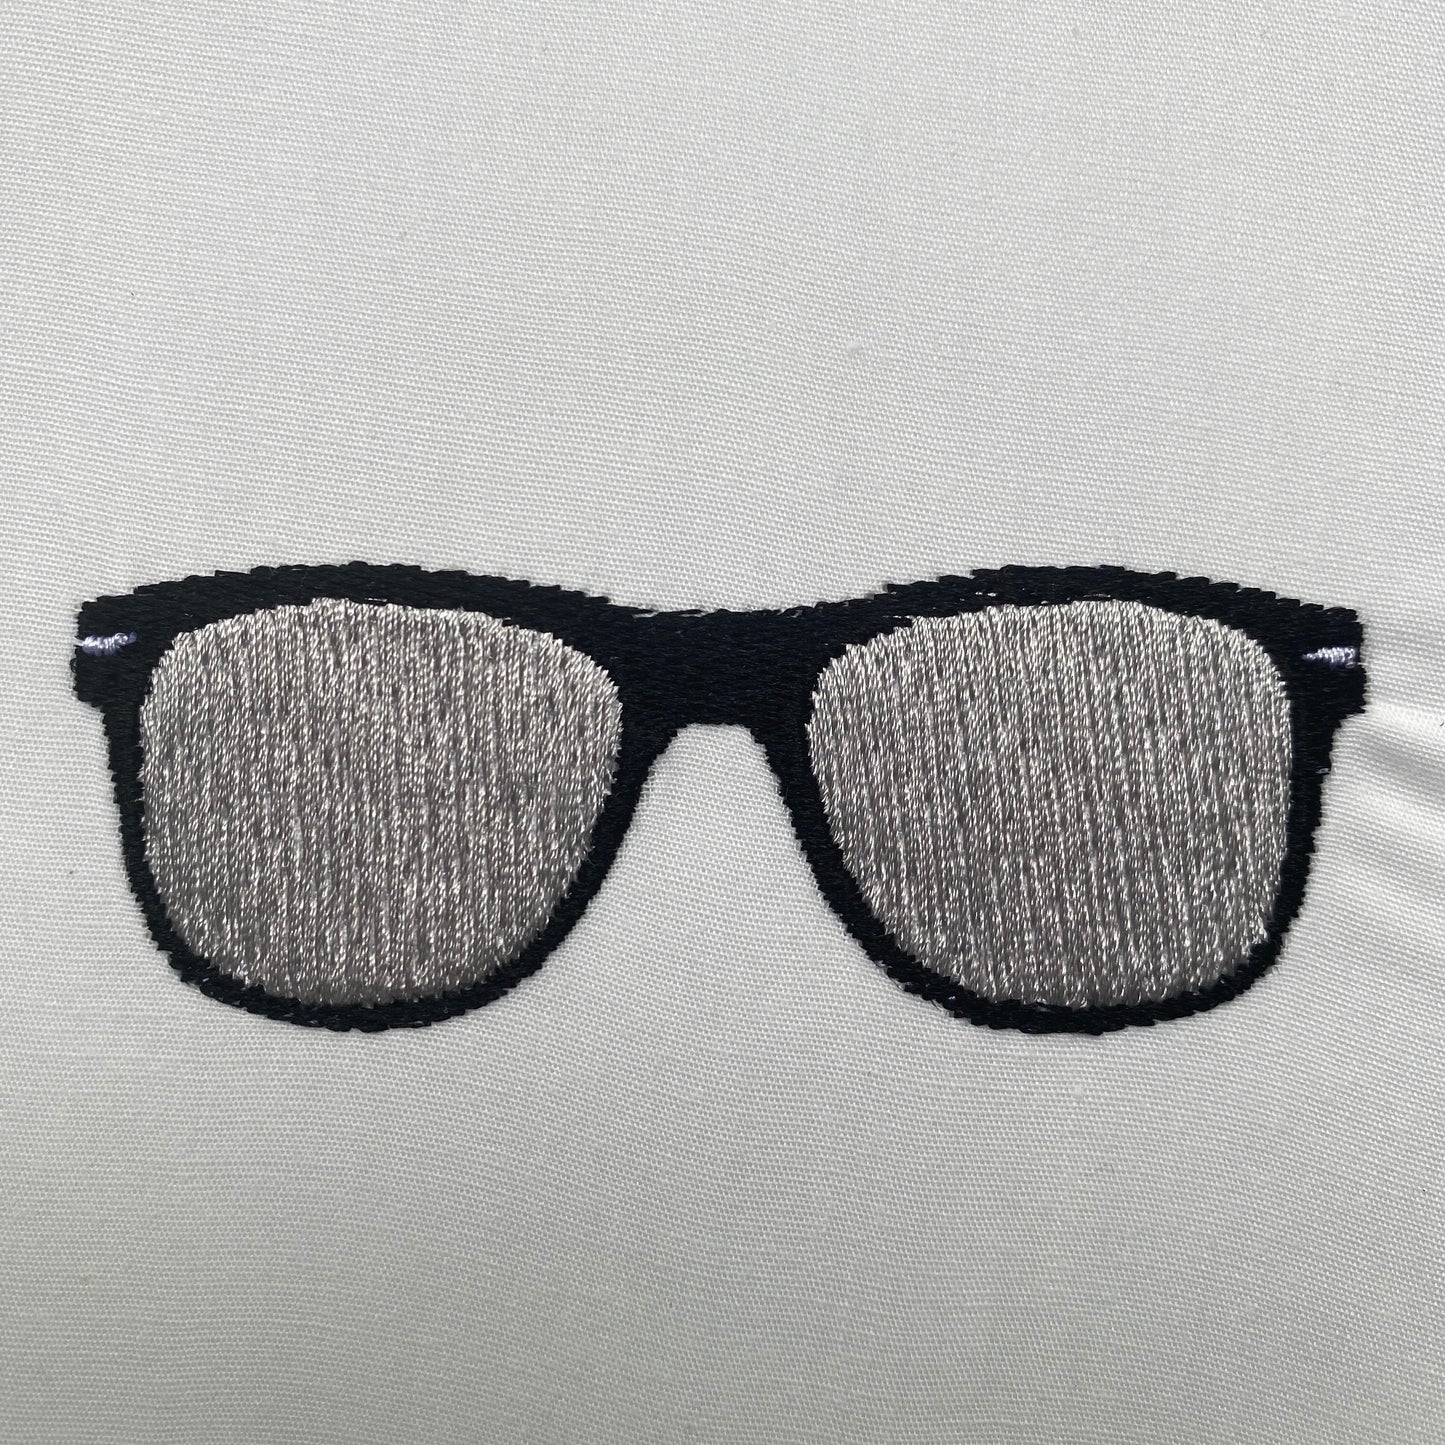 Ray-Ban Glasses Embroidery File